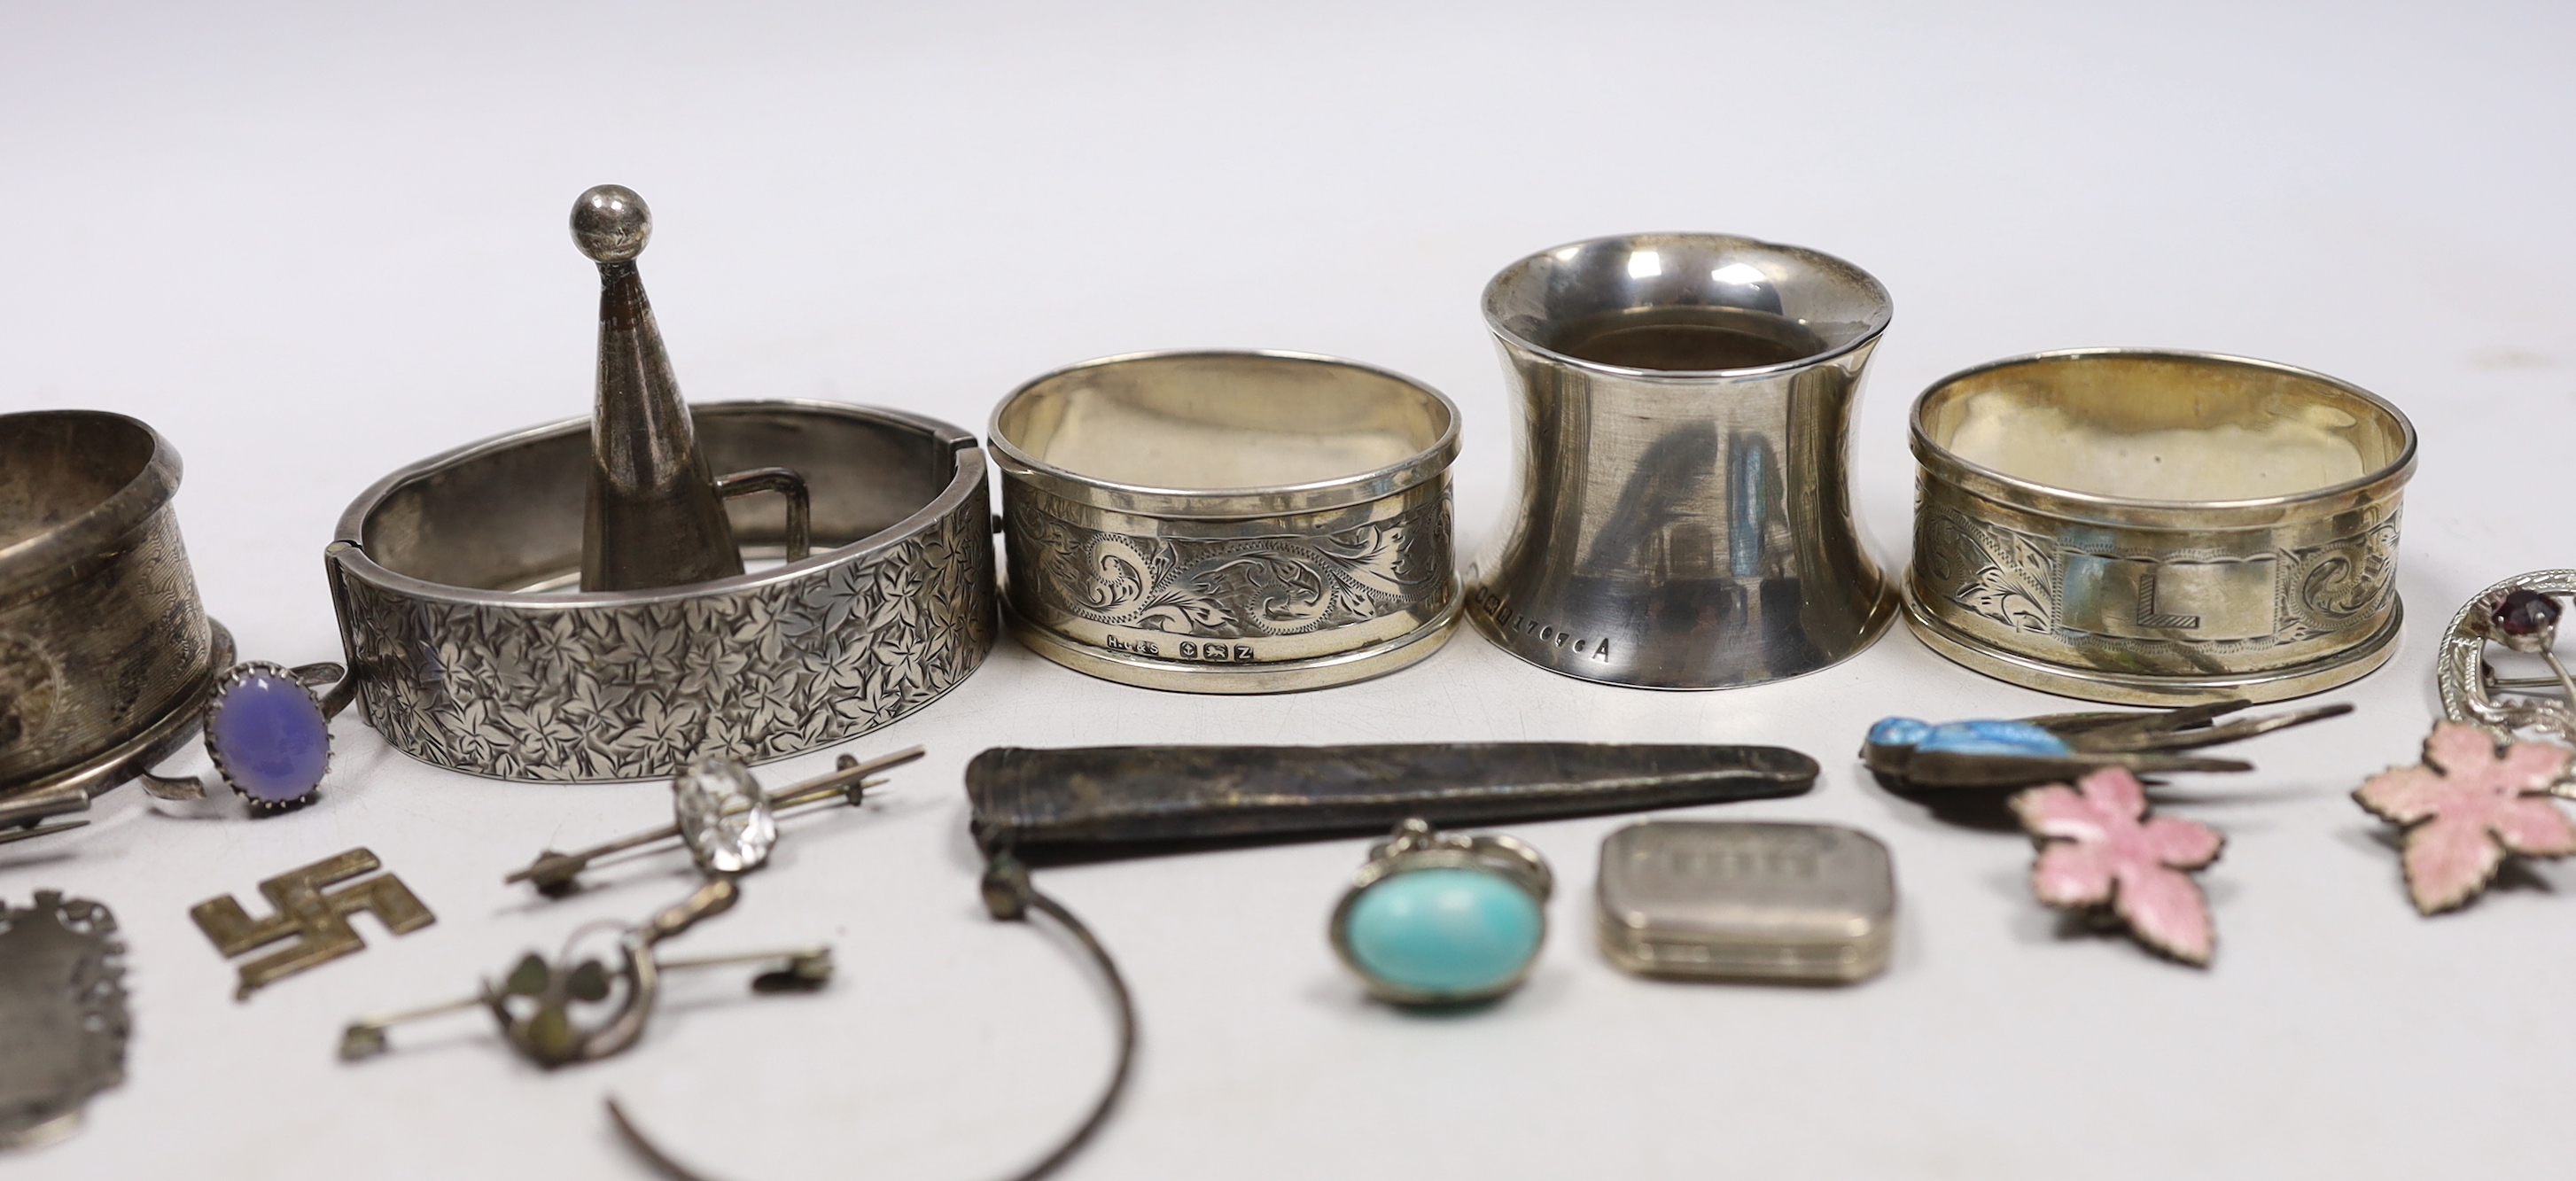 Small silver and other items including napkin rings, bracelets, 19th century vinaigrette, medals, etc.